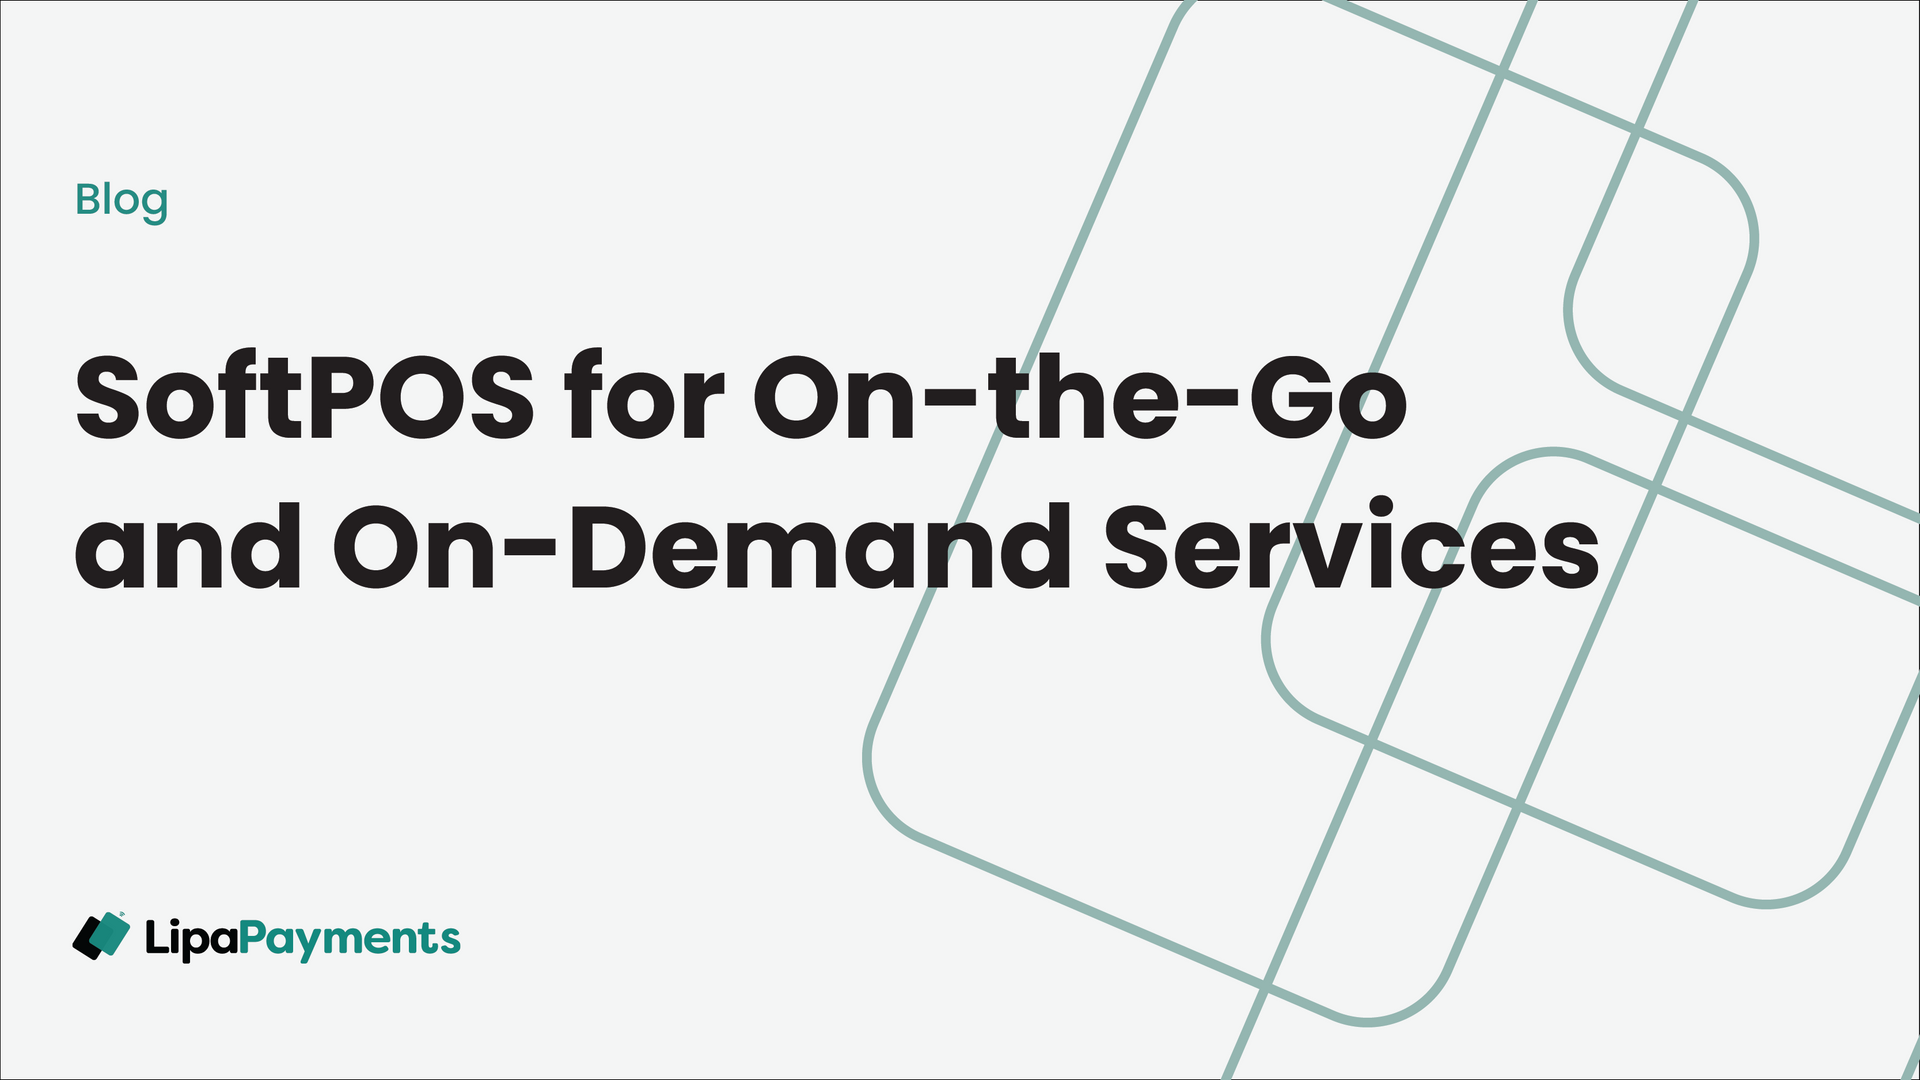 SoftPOS for On-the-Go and On-Demand Services